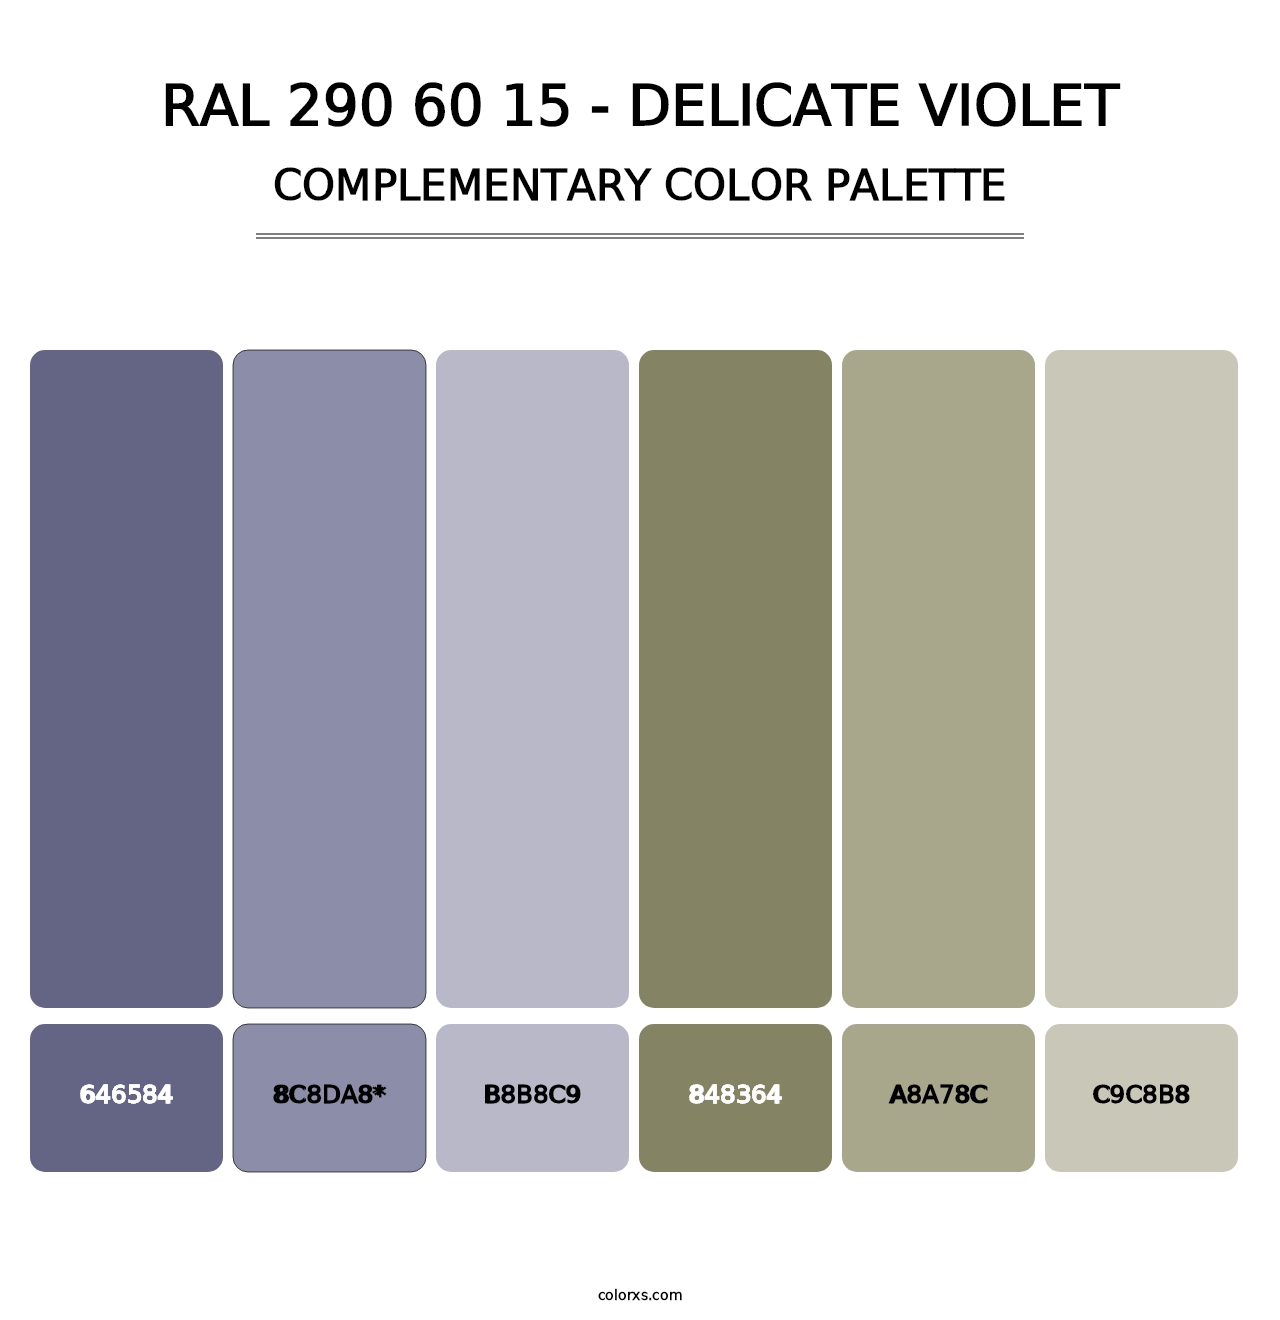 RAL 290 60 15 - Delicate Violet - Complementary Color Palette